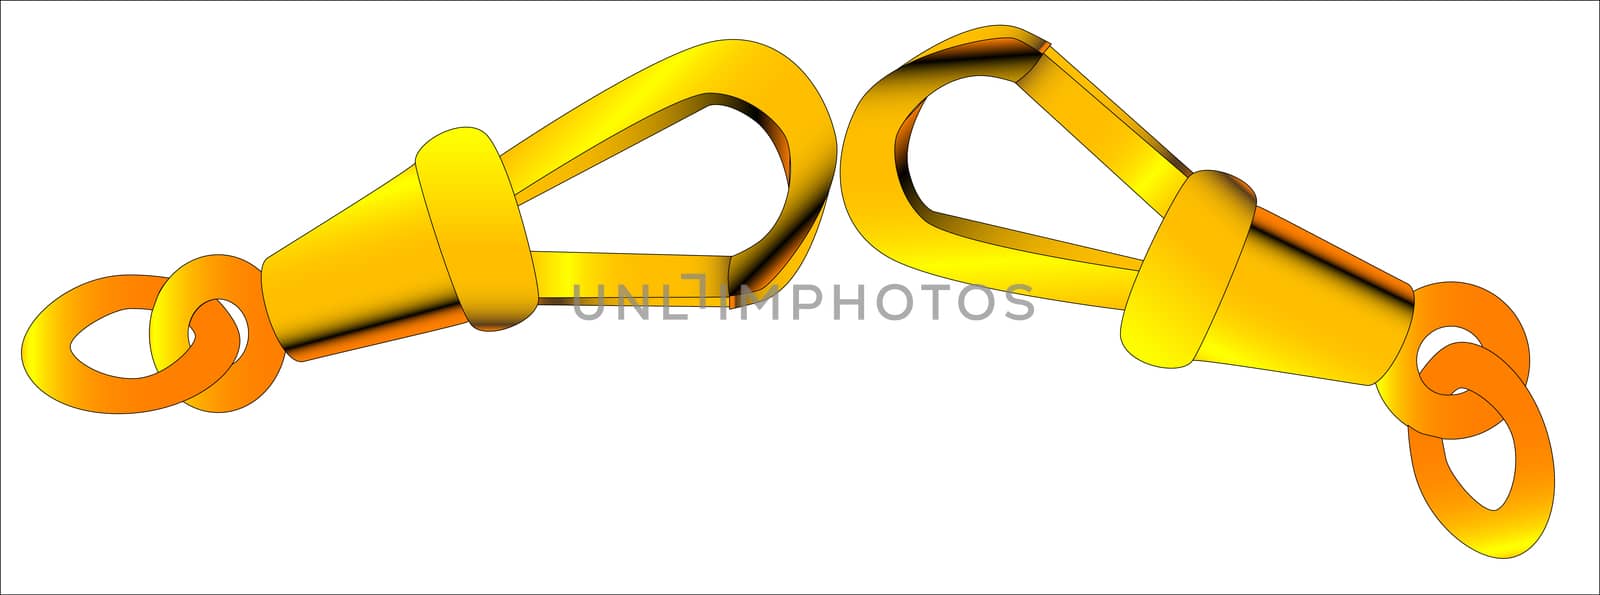 A gold clasp from a watch chain isolated over a white background